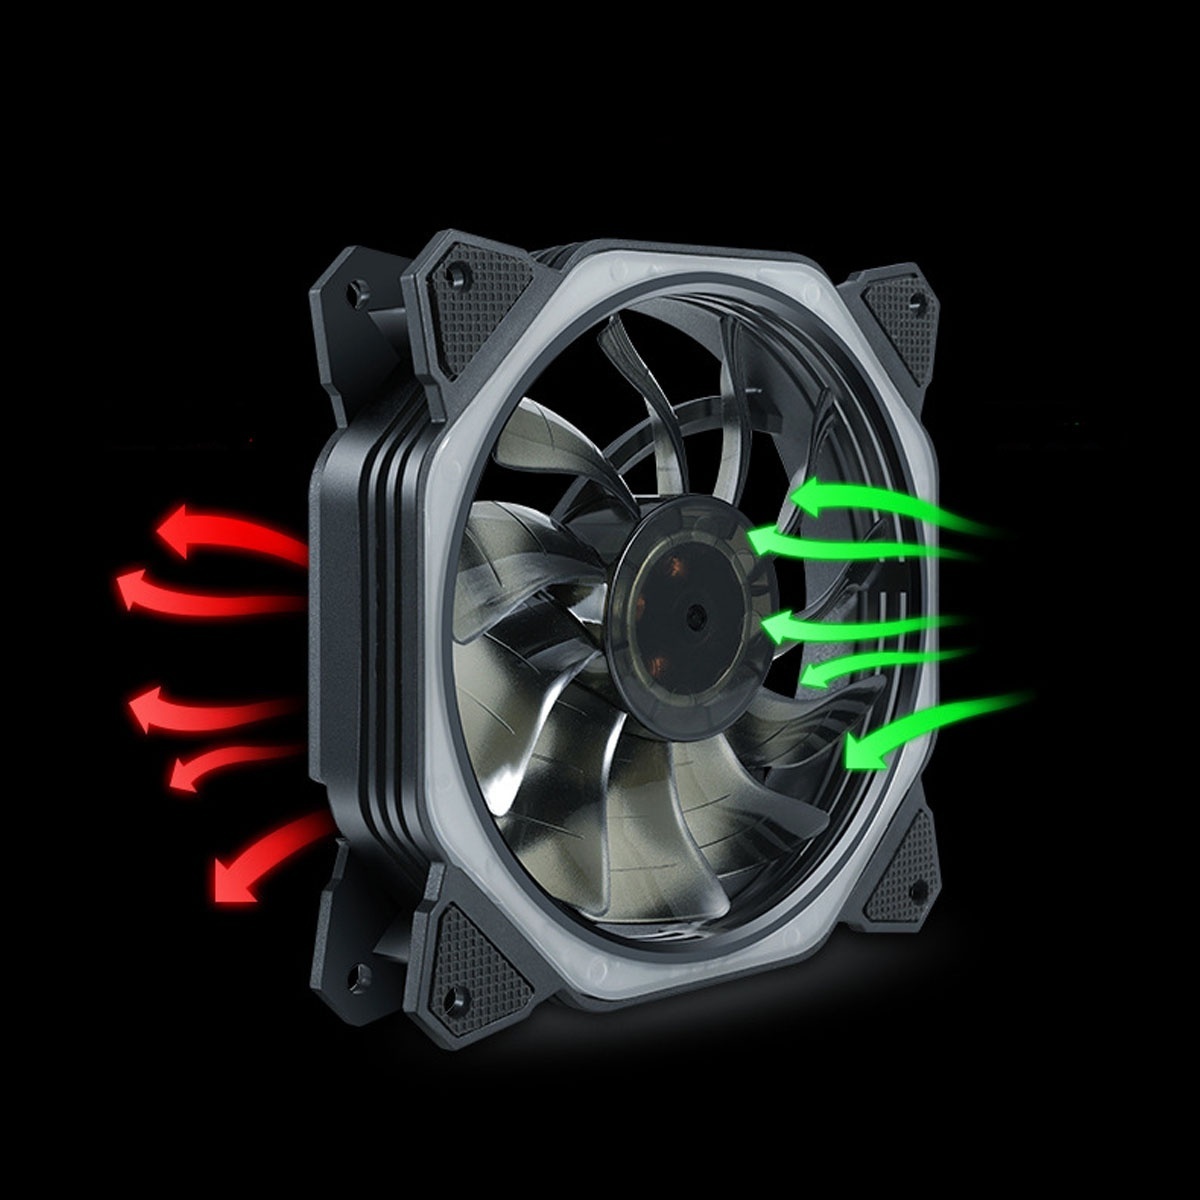 6-Pin-121225cm--RGB-Colorful-LED-Cooling-Fan-for-Computer-Case-1531112